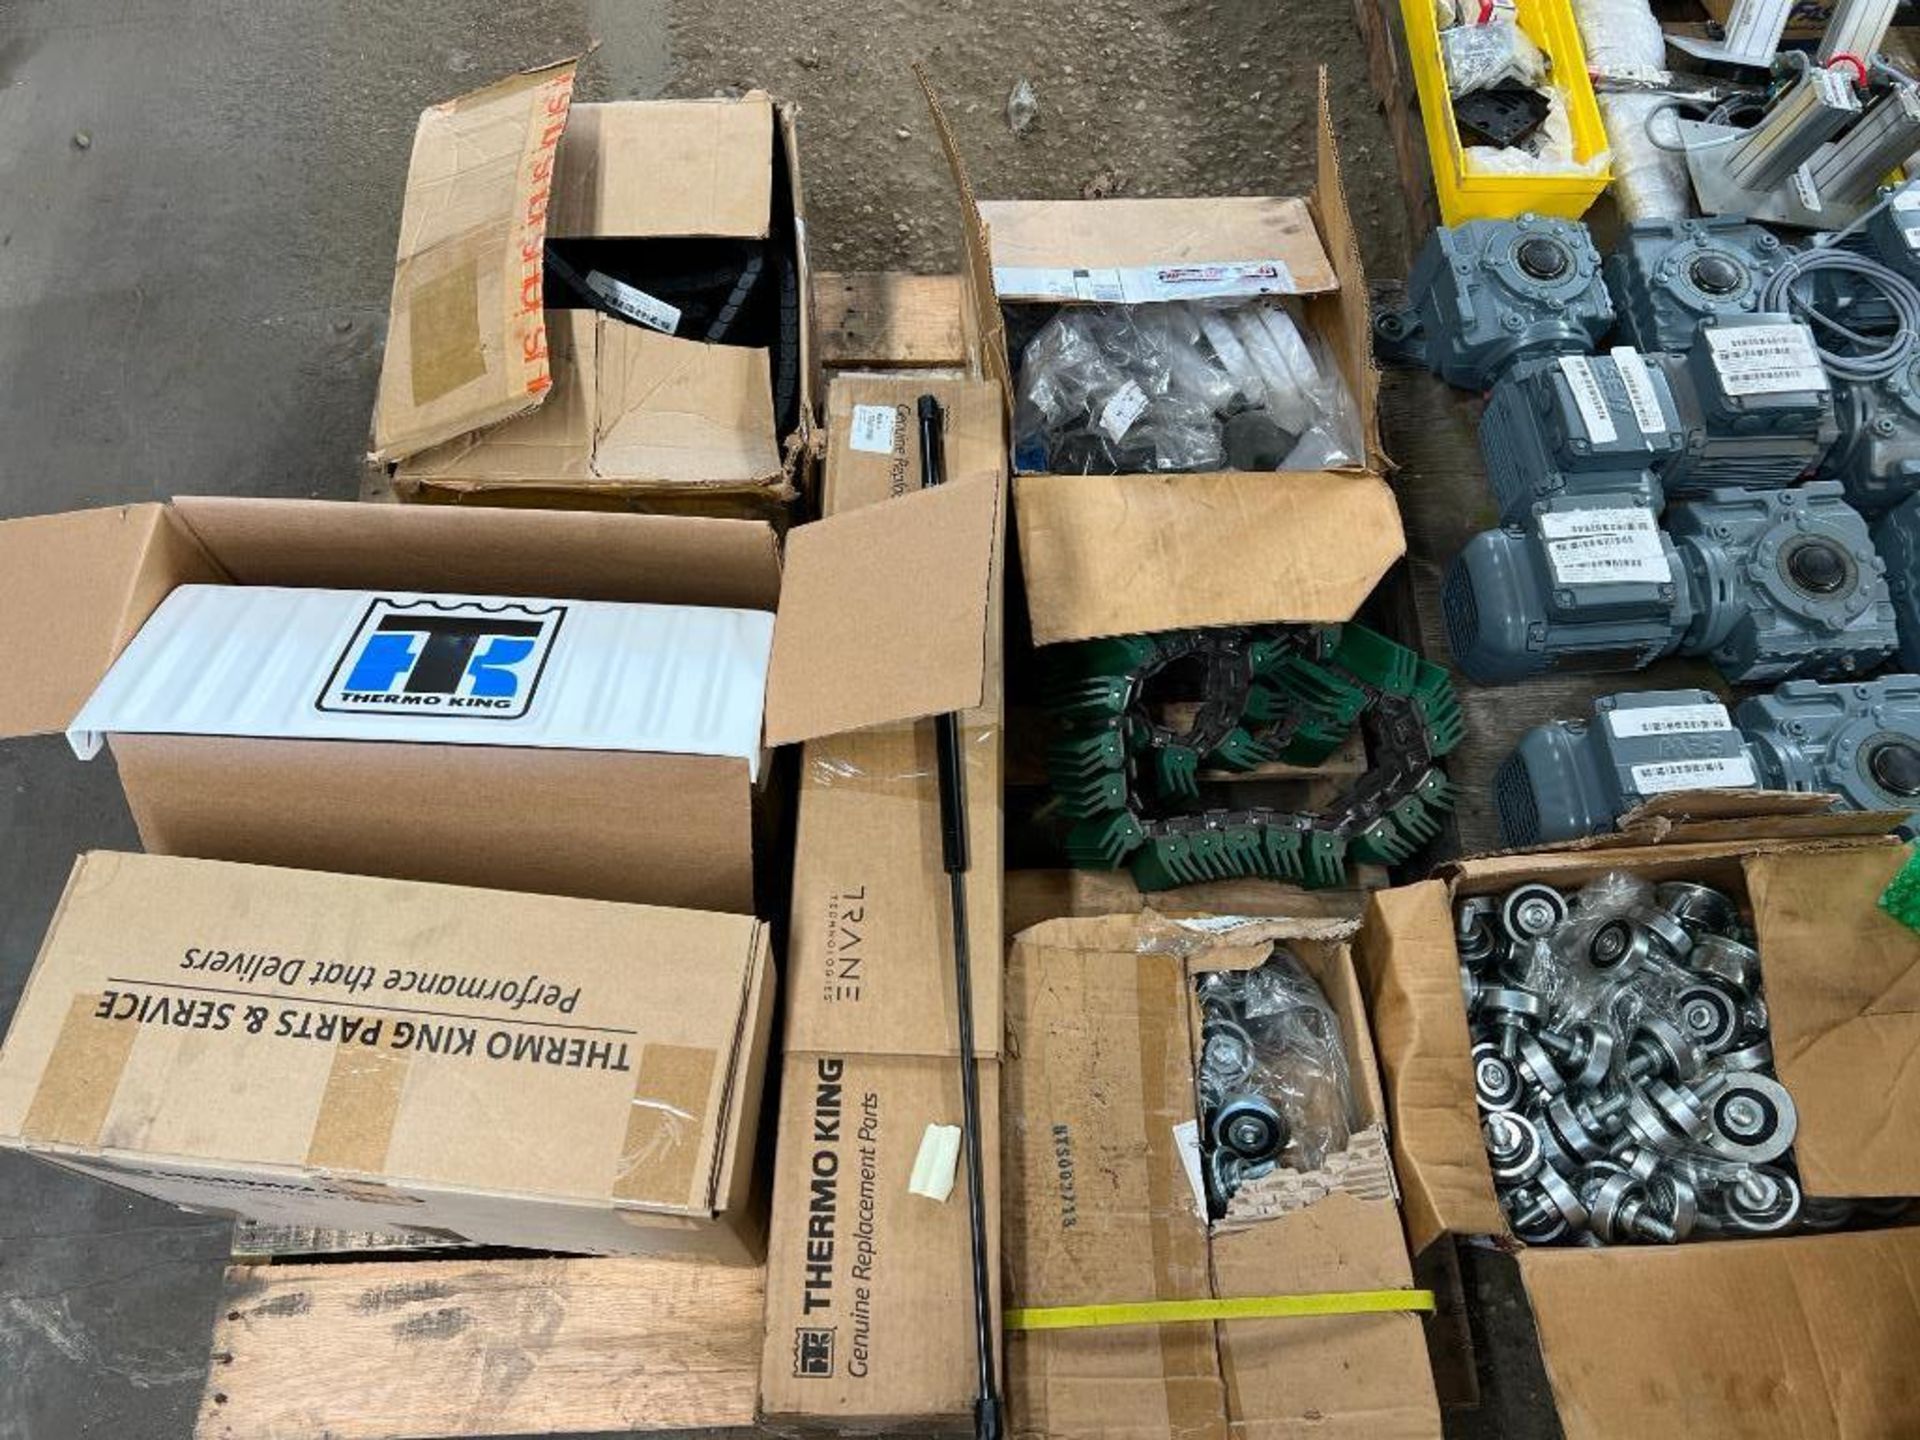 Assorted Thermo King Chiller Parts, Gear Reducers, Side Panels, Conveyor Belts and Parts